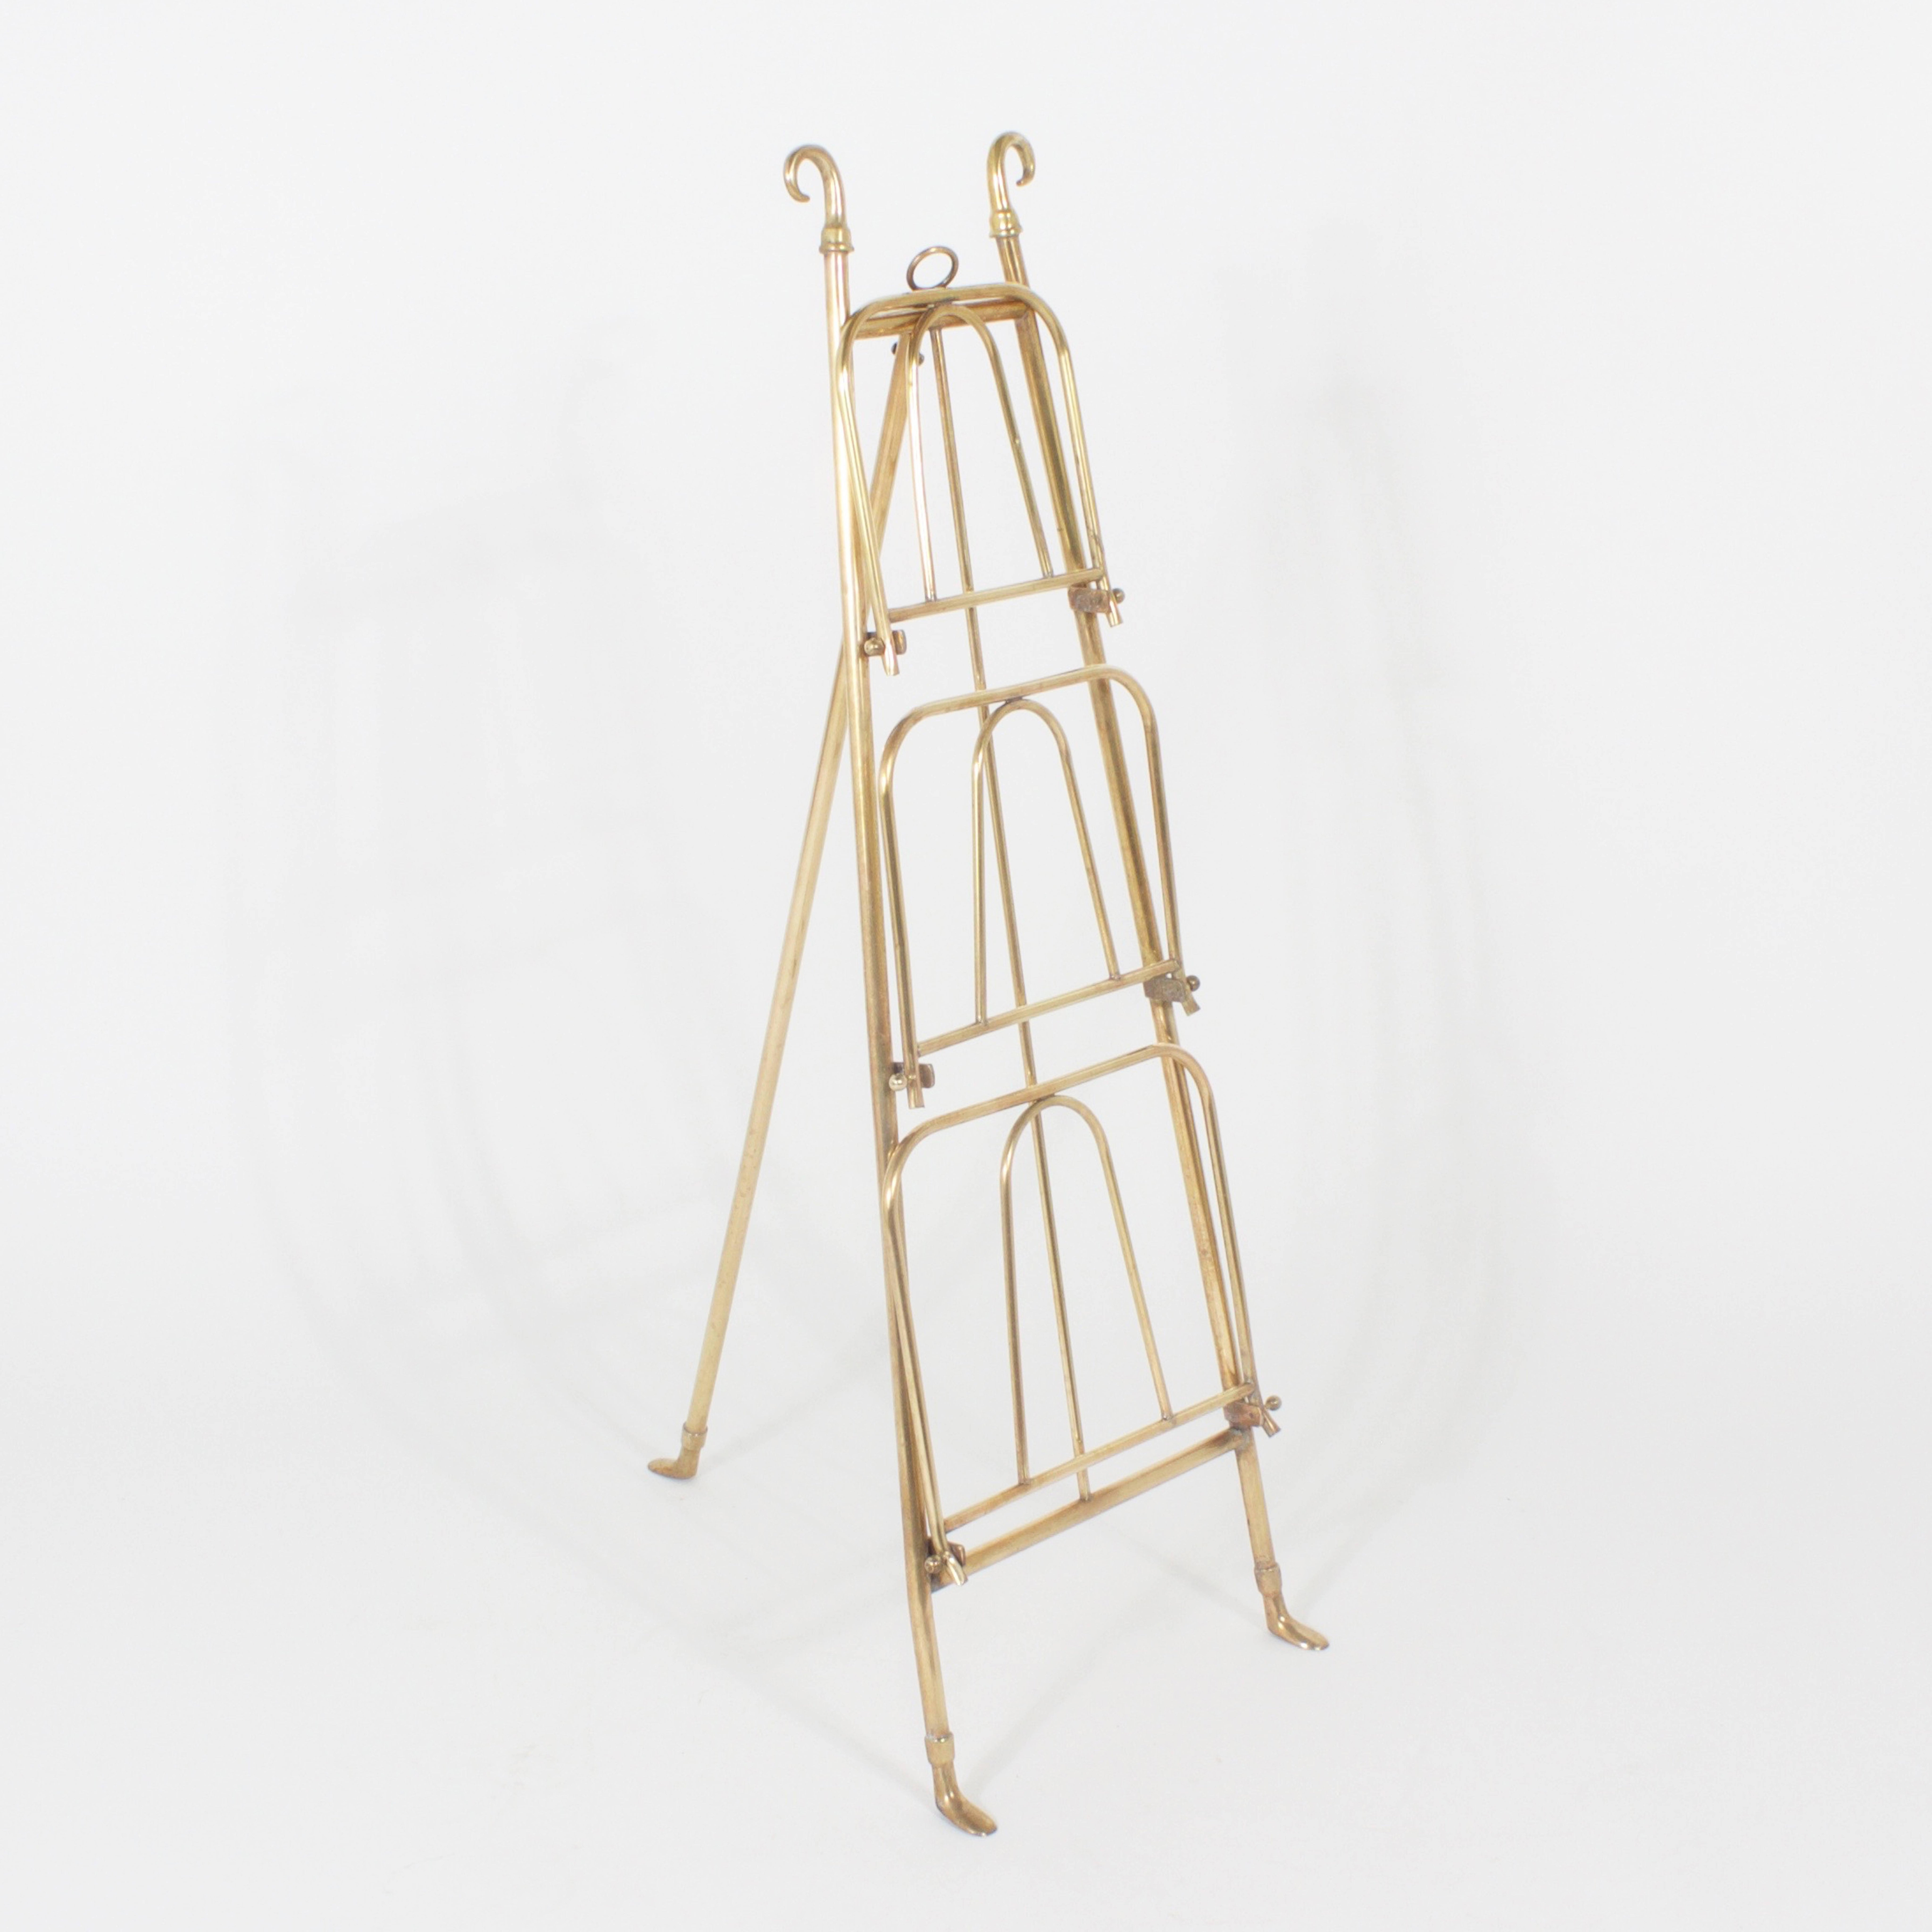 Edwardian brass 3 tiered easel or rack with shepard staff hooks at the top and stylized women's feet at the bottom. This easel folds up to flat for easy storage and shipping. Can be utilized as an easel, book, or magazine rack. (Depth 3